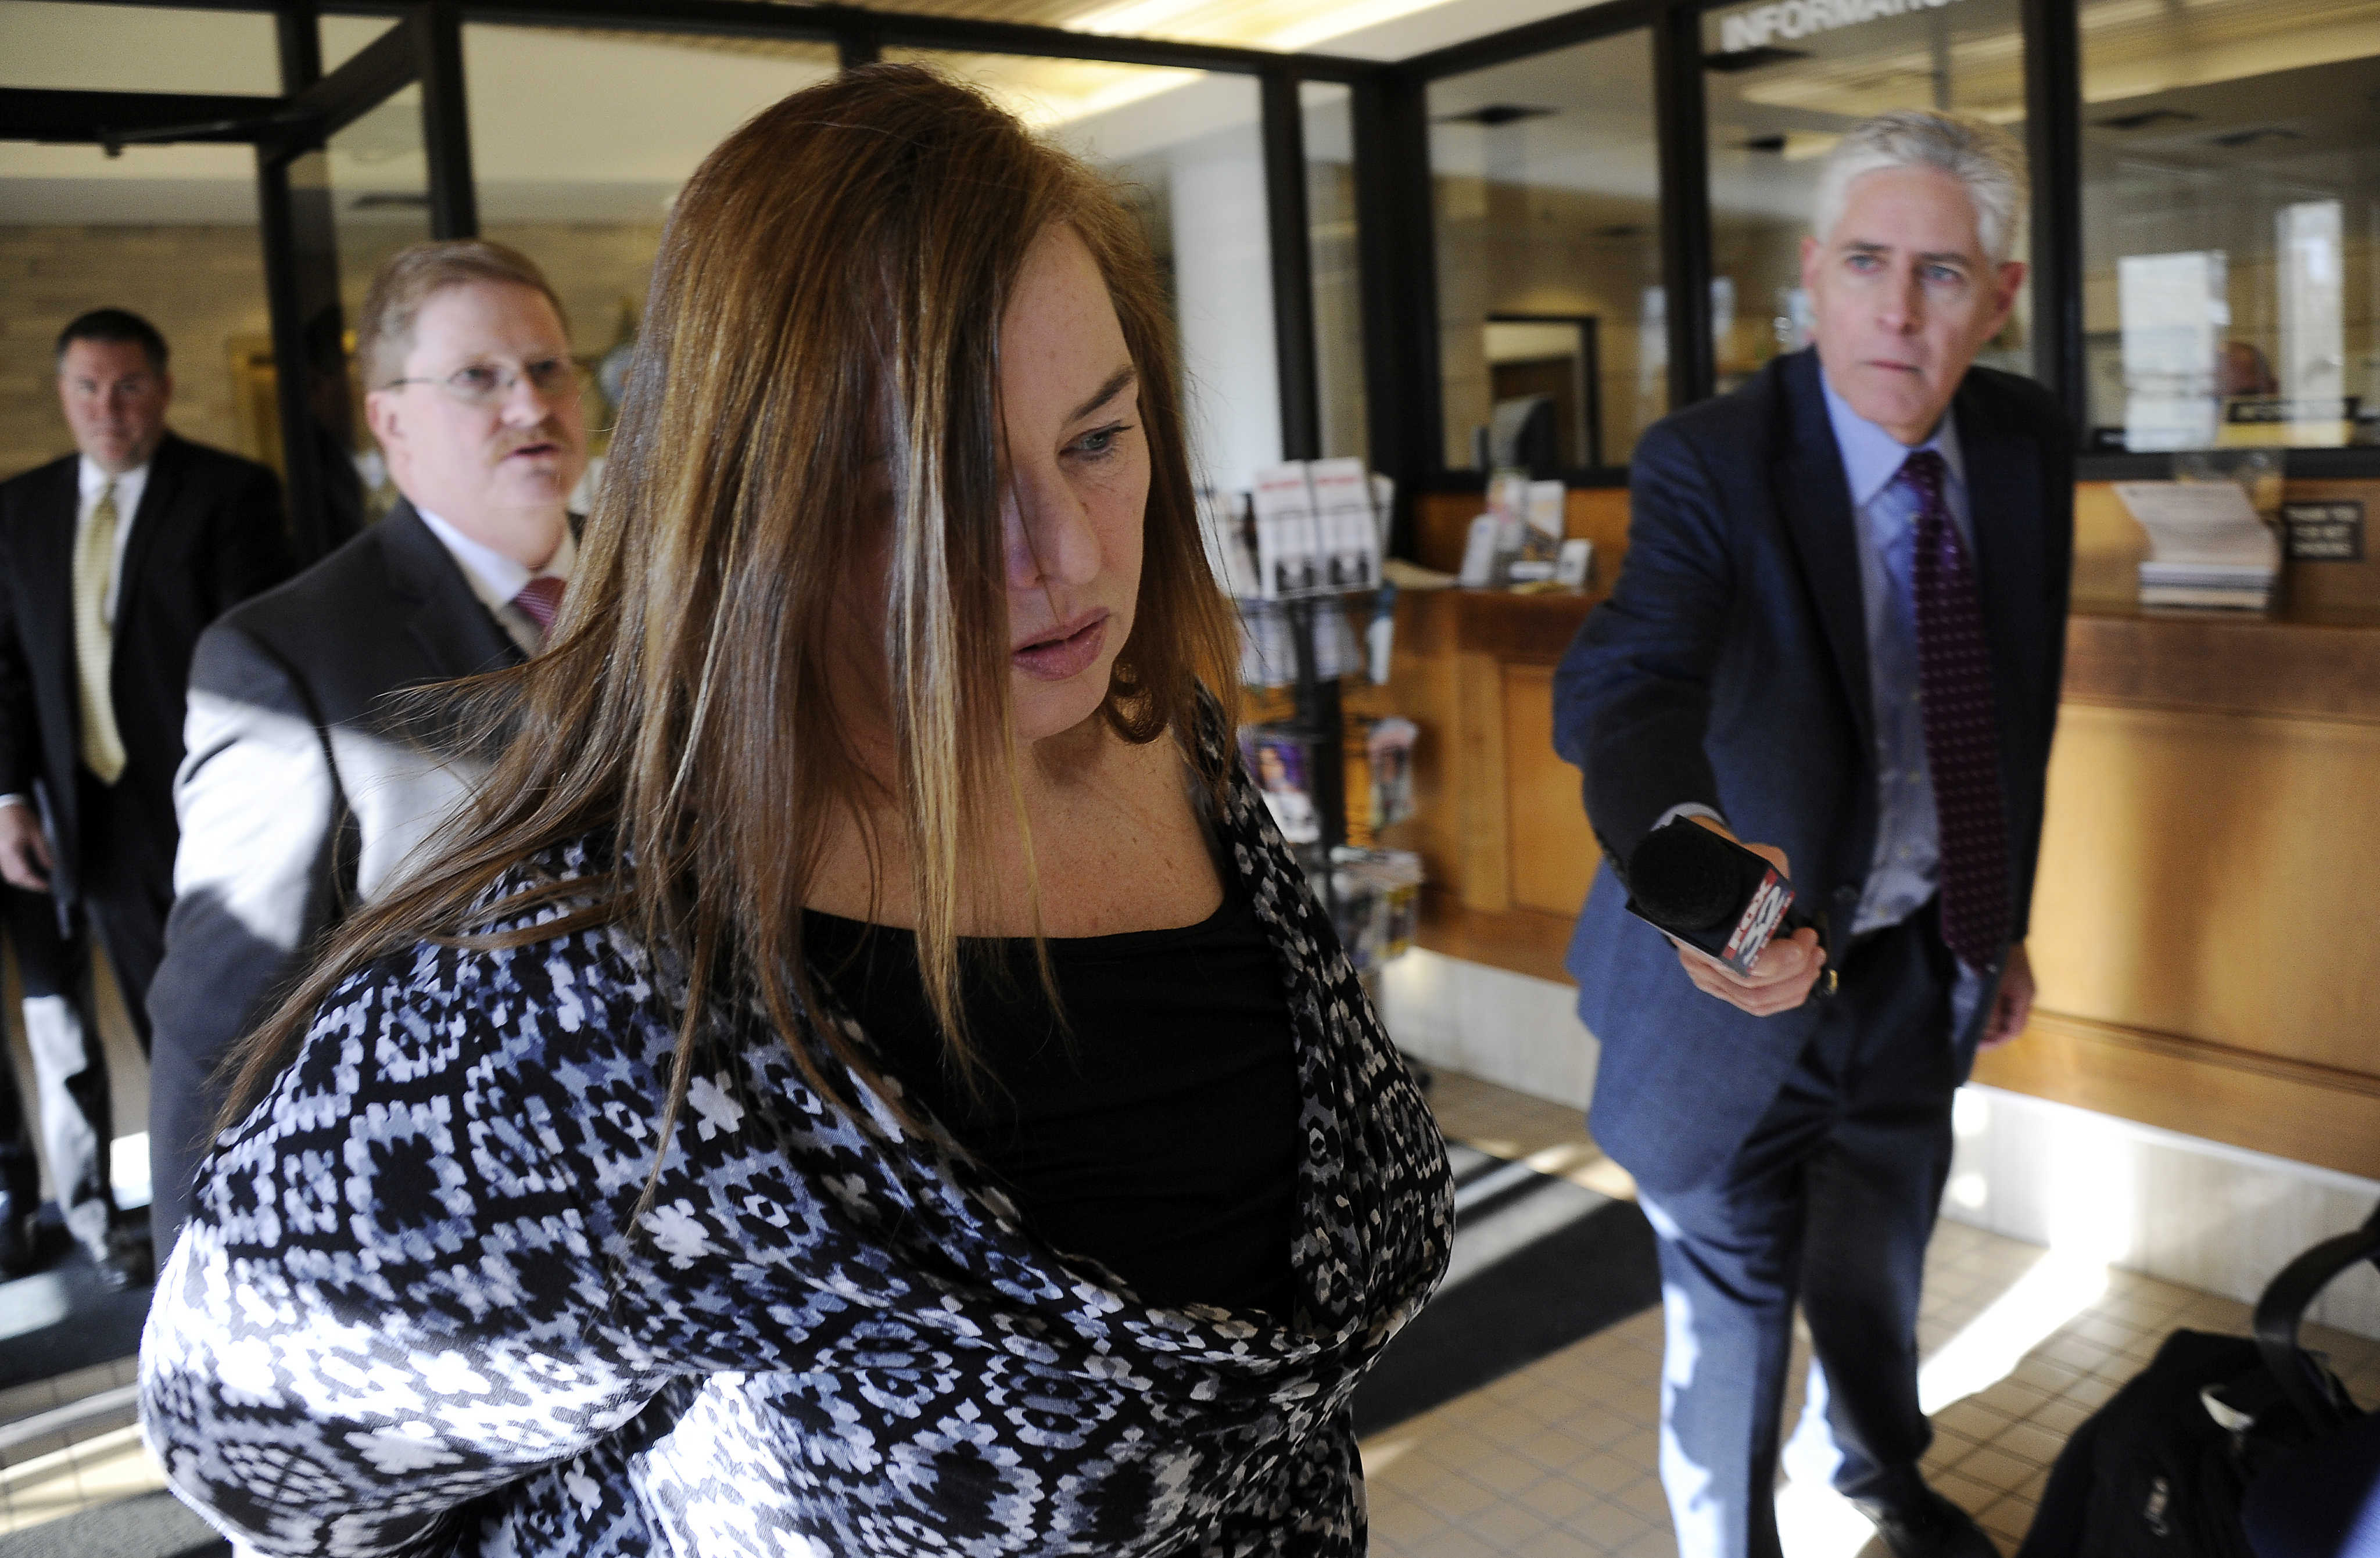 Melodie Gliniewicz, 51, of Antioch,Ill.,  appearars at the Lake County sheriff's office after she was indicted in Waukegan, Ill., by a Lake County grand jury. (Mark Welsh—AP)